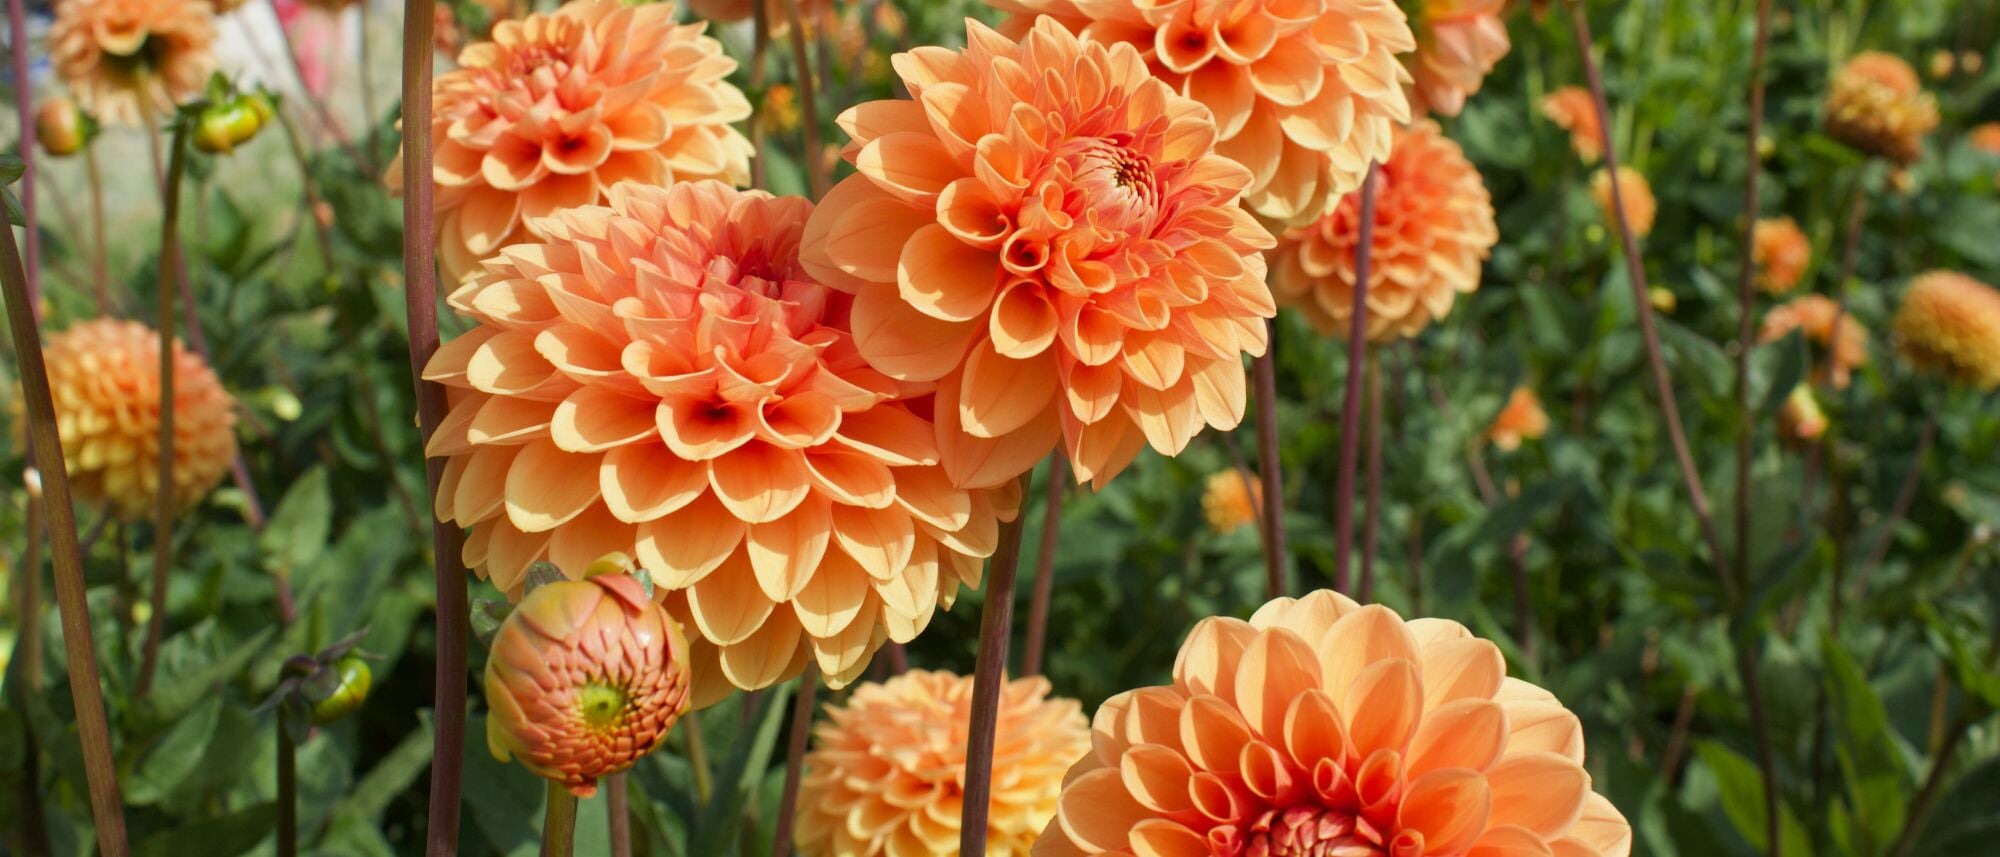 Grow dahlias for a great addition to any bouquet